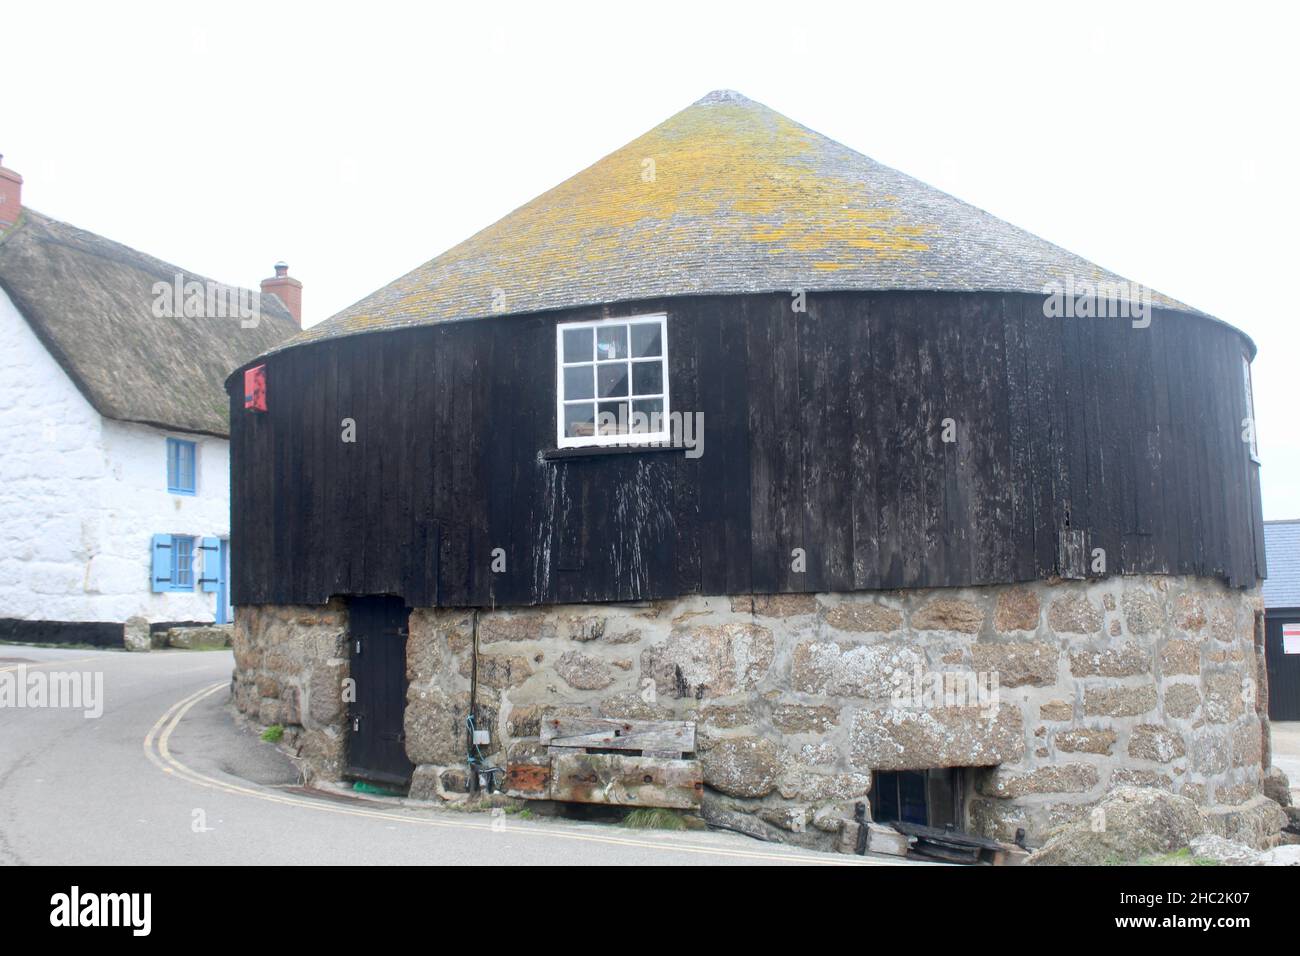 The Old Capstan or Roundhouse in Sennen Cove, Cornwall. Close to Lands End and on the South West Coastal Path. Now an art gallery and gift shop. Stock Photo